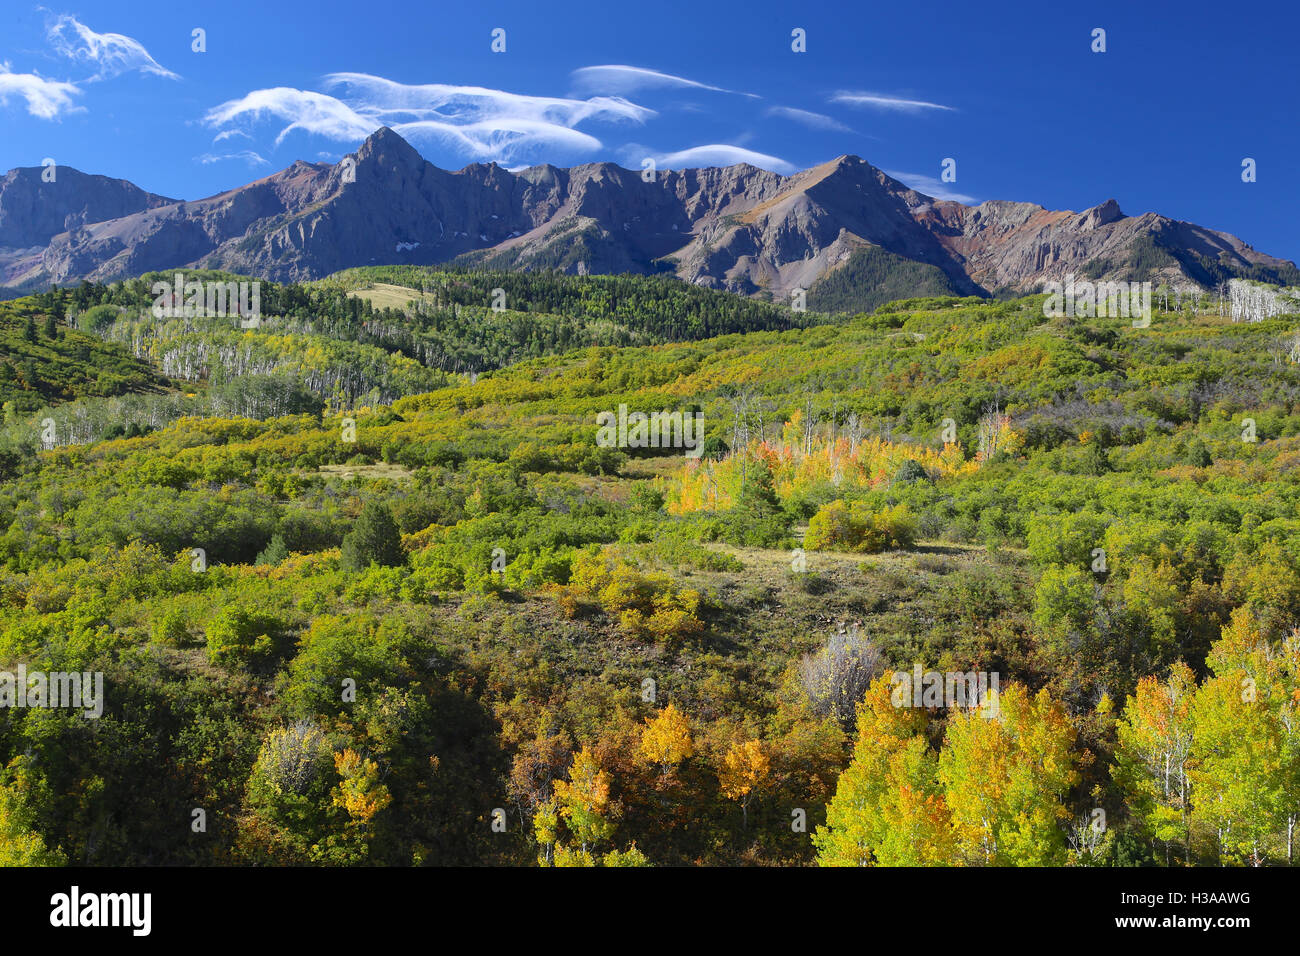 Dallas Divide Colorado Rocky Mountains day with yellow and green aspen trees Stock Photo